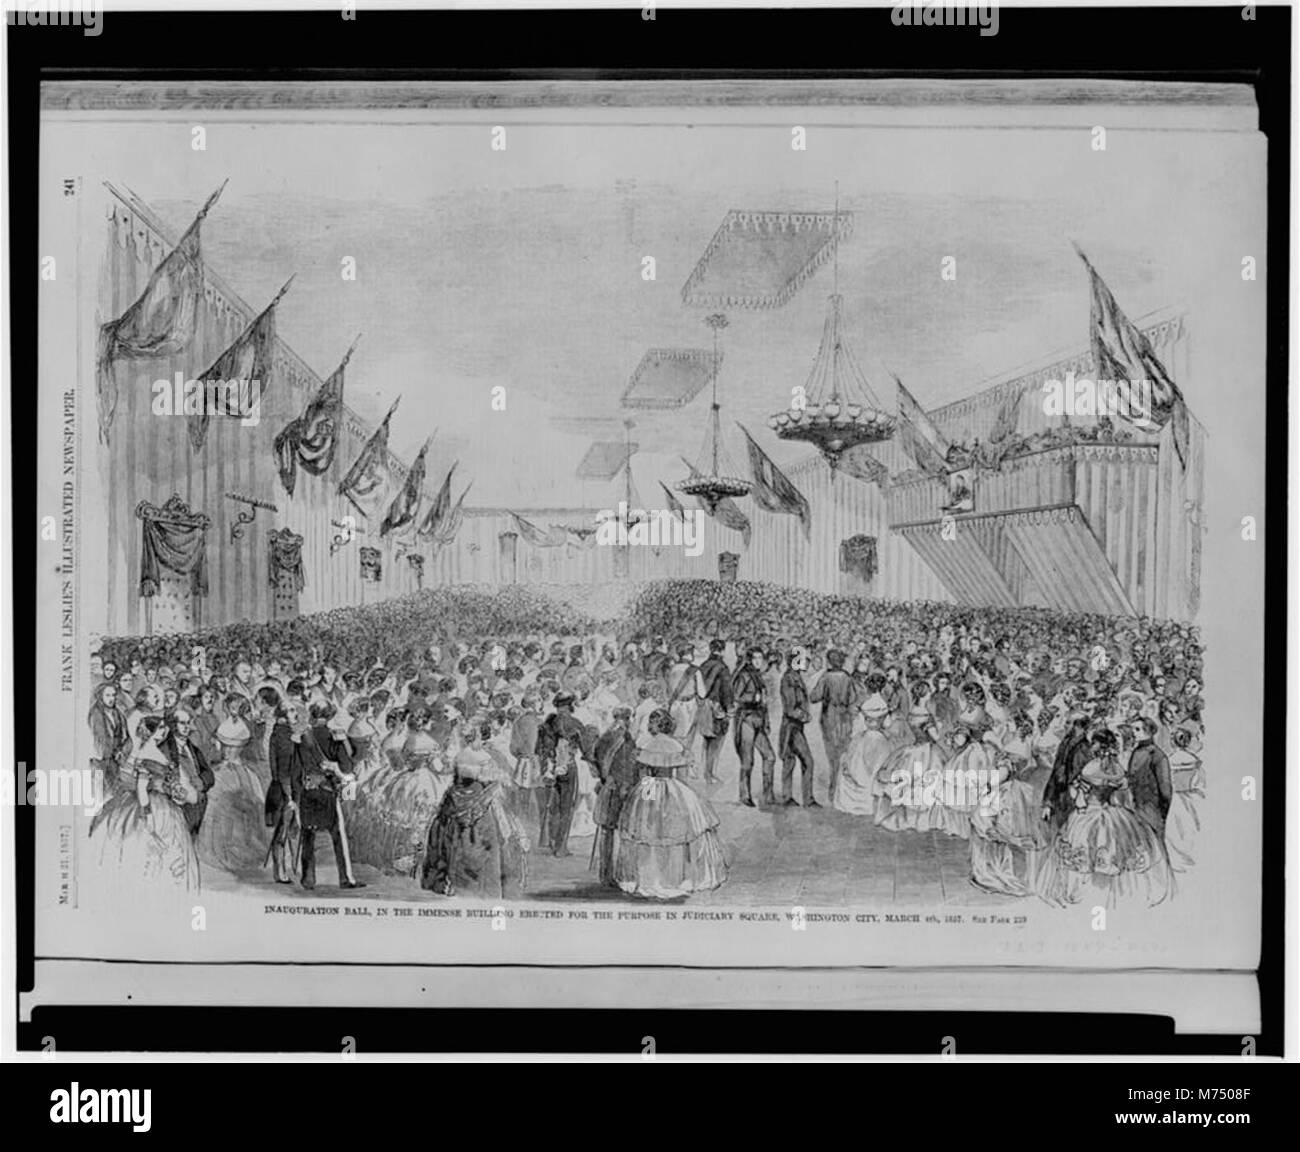 Inauguration ball in the immense building erected for the purpose in Judiciary Square, Washington City, March 4th, 1857 LCCN00650927 Stock Photo